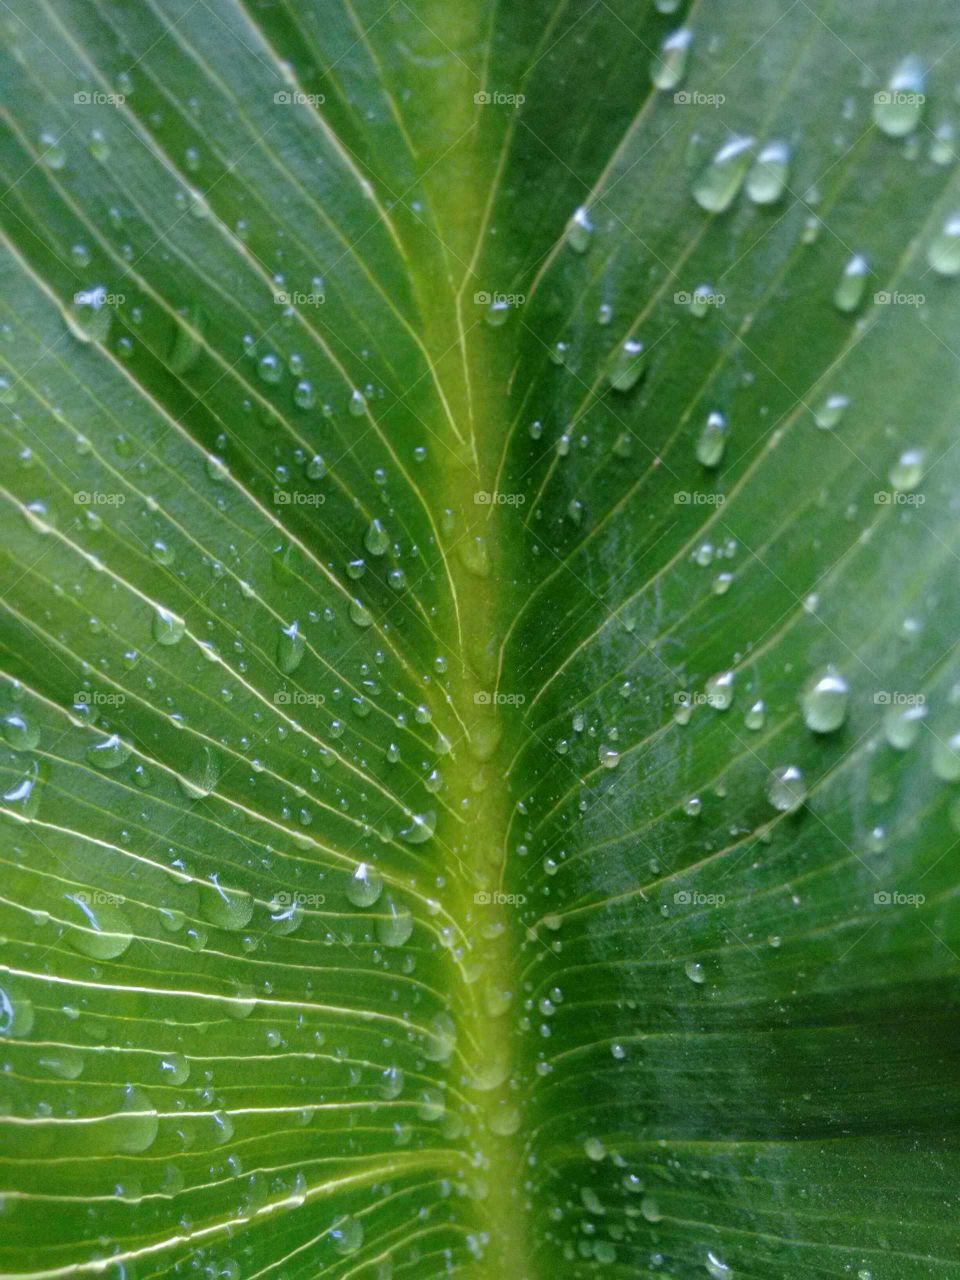 Green leaf texture with water droplets. Leaf of Calla Lily or Arum Lily (Zantedeschia aethiopica). It was planted to ornament the garden of a house in Brazil.